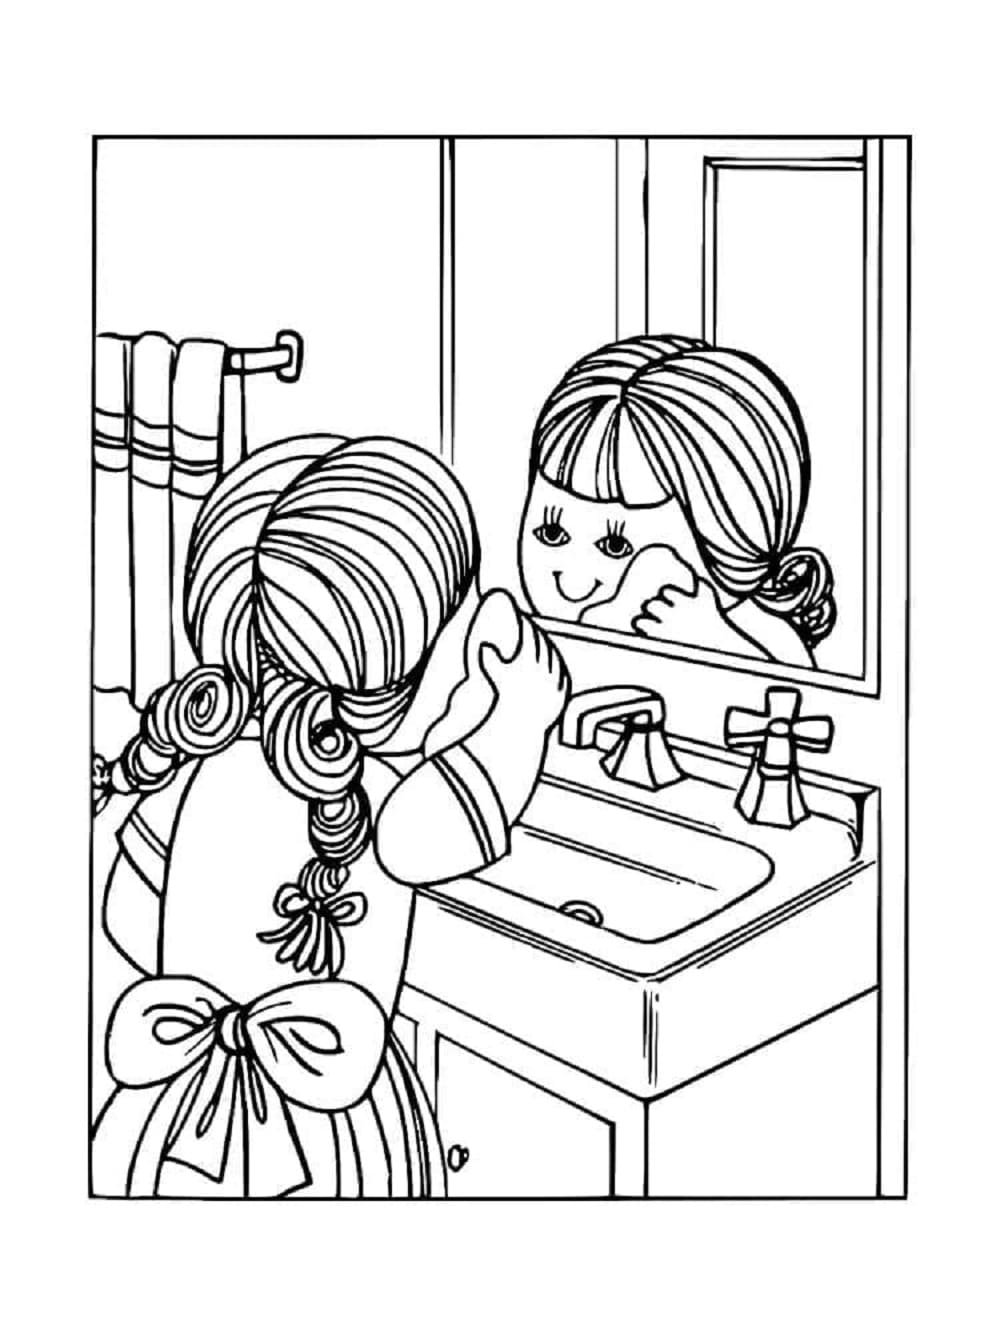 Printable Hygiene Download Coloring Page